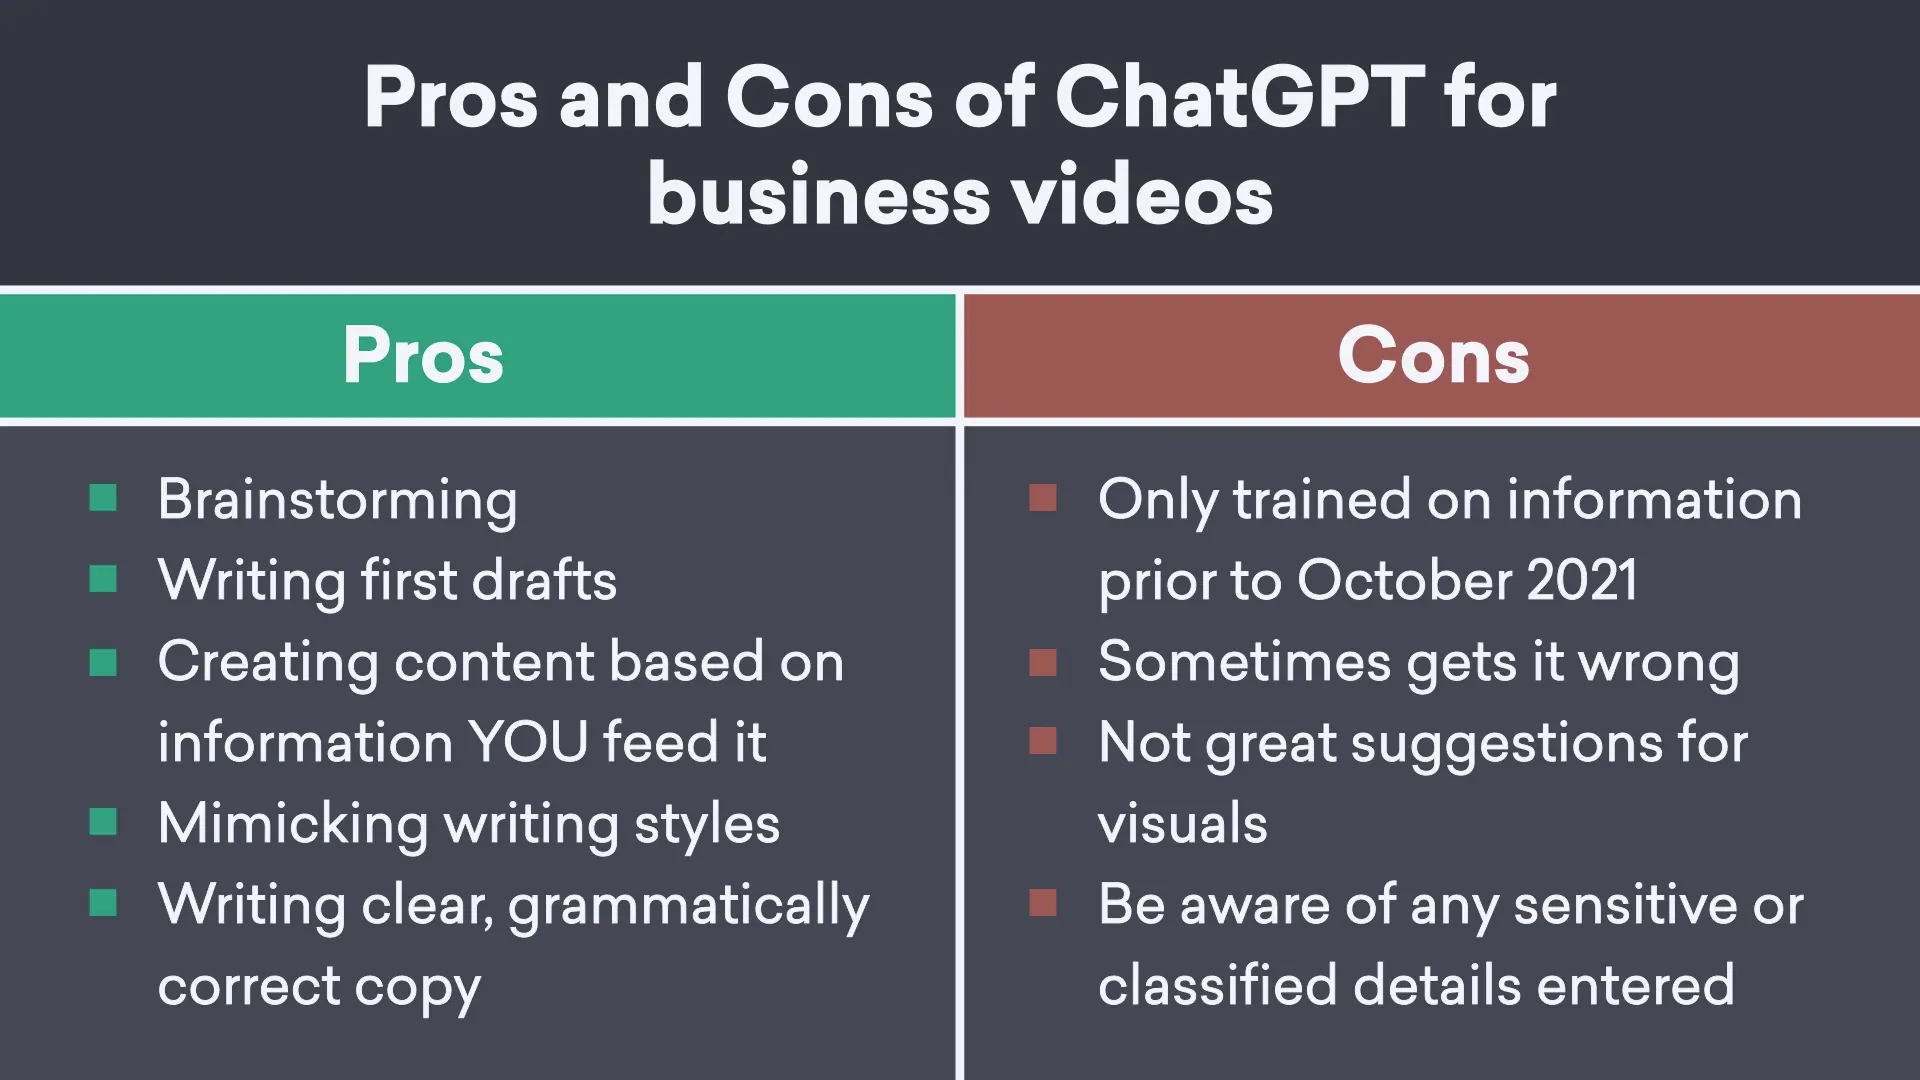 ChatGPT Pros and Cons for business videos